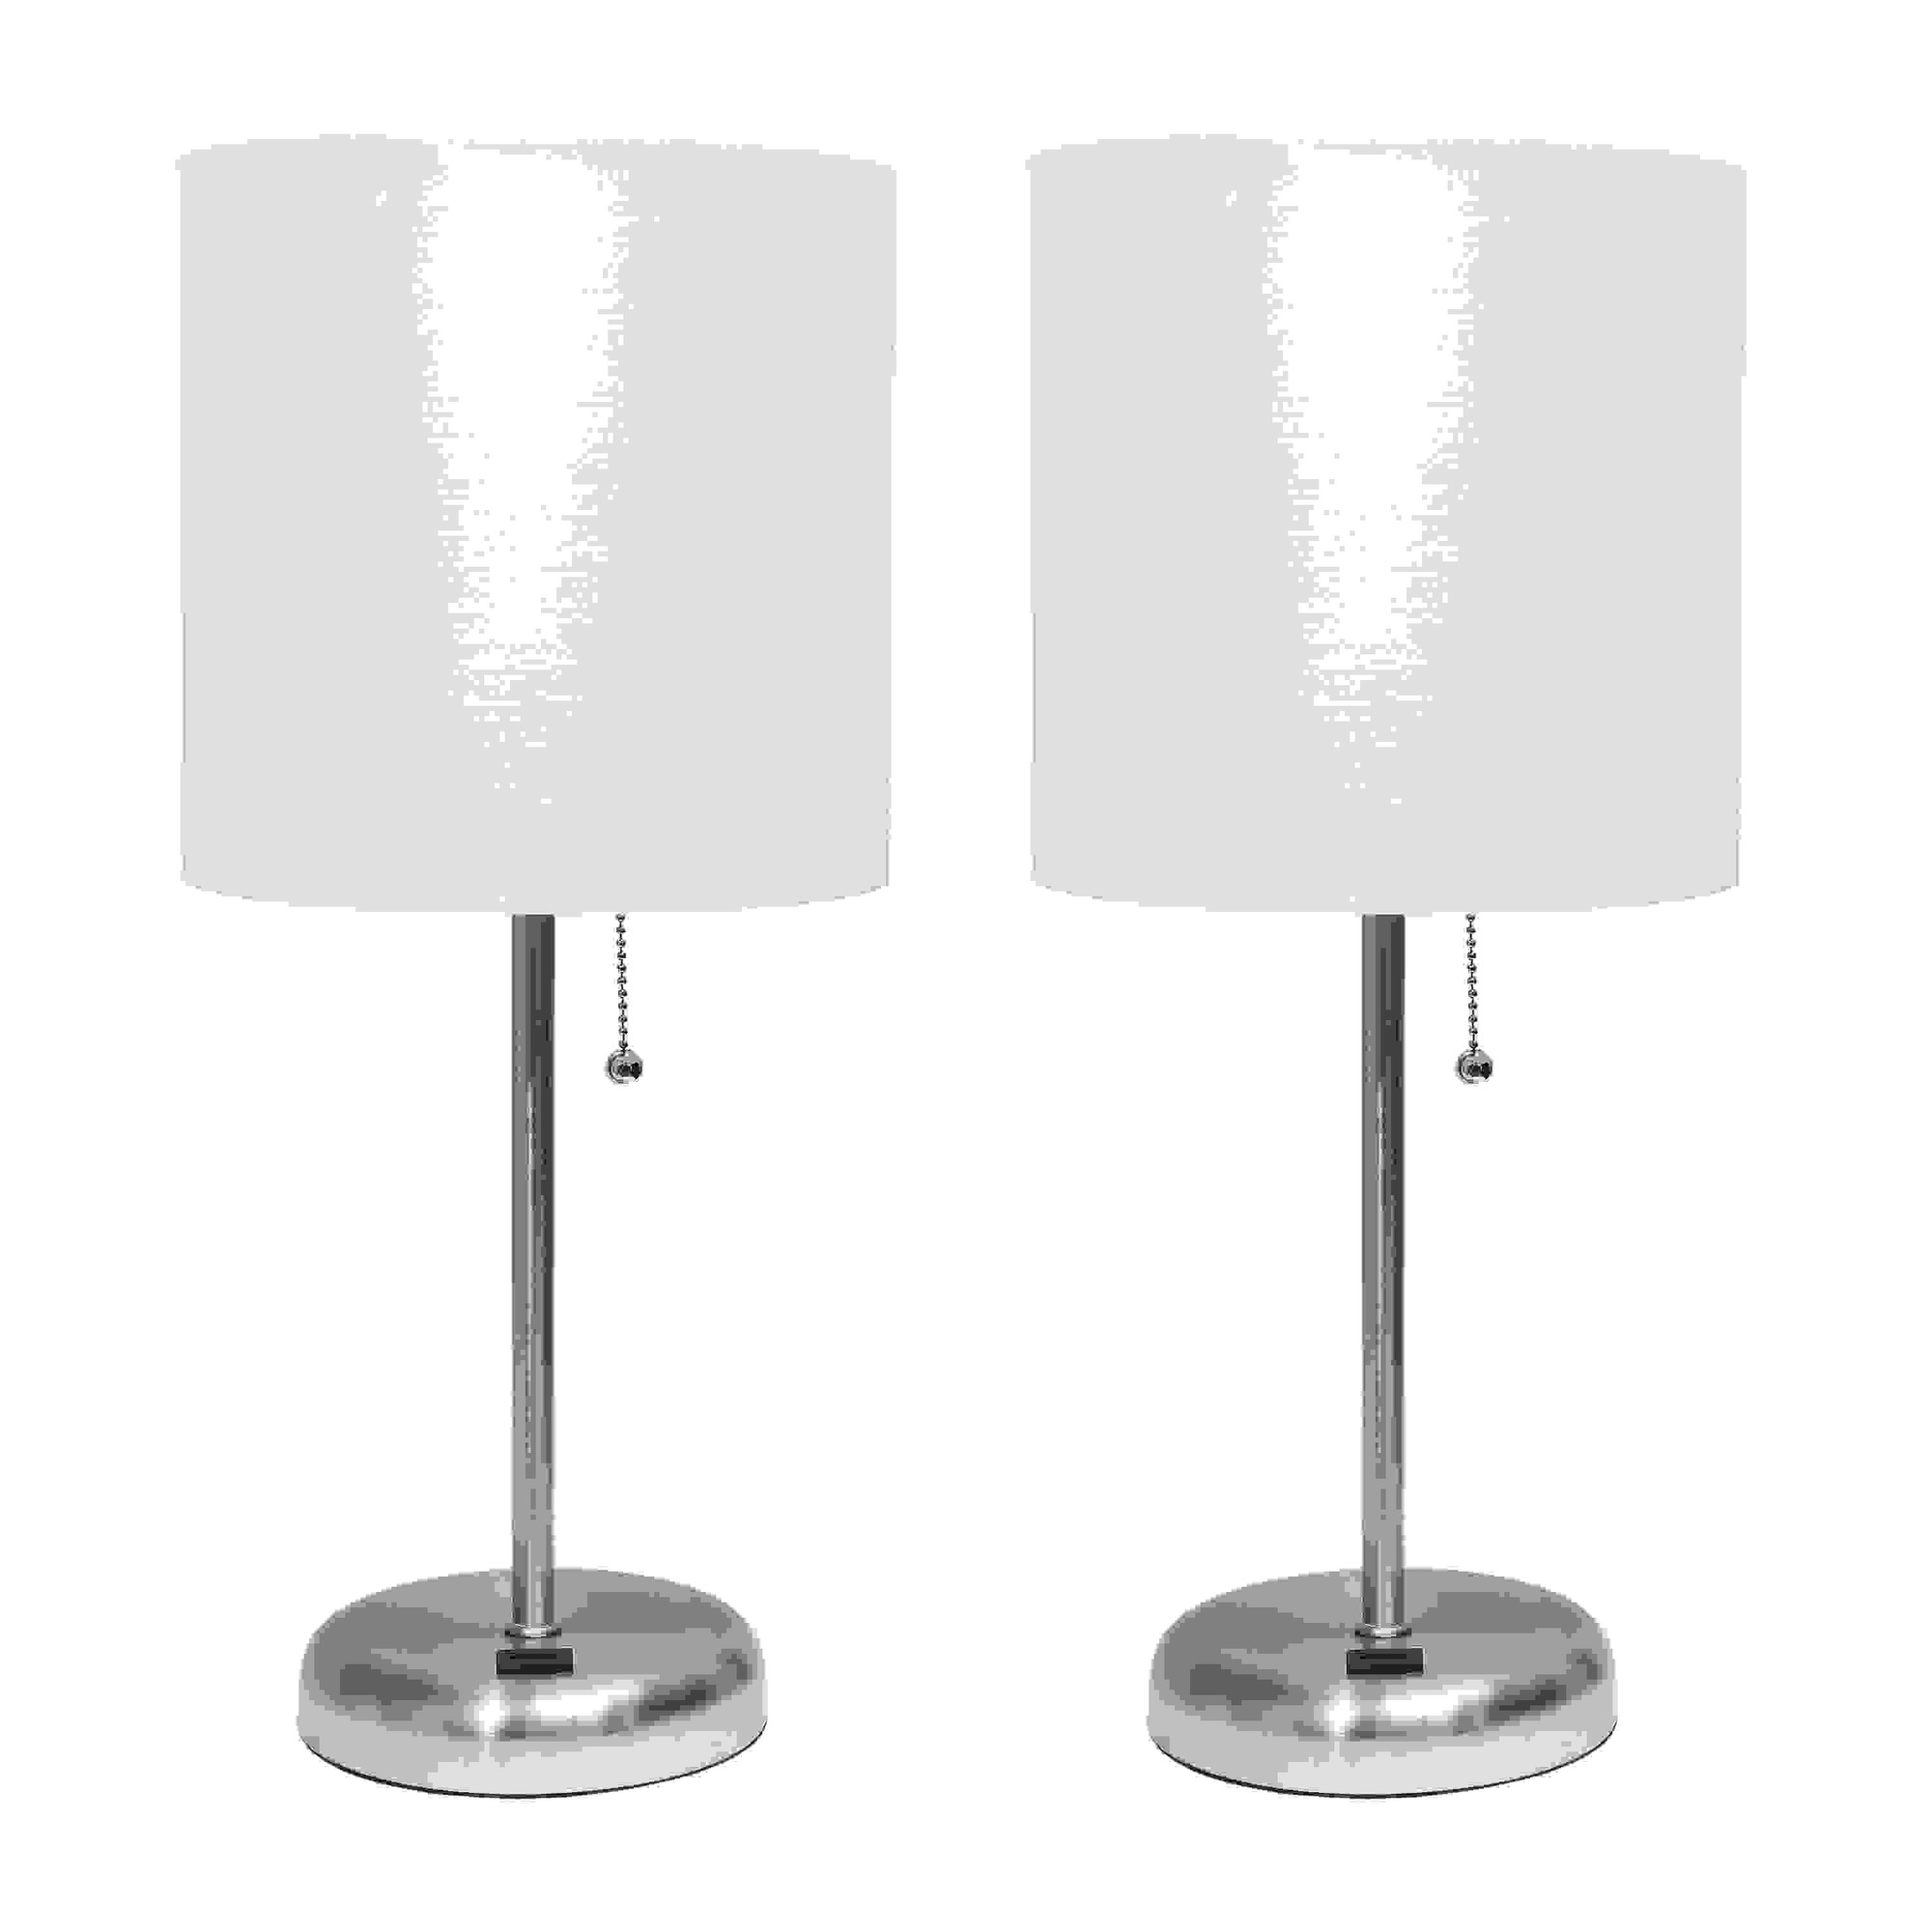 Simple Designs Stick Lamp with USB charging port and Fabric Shade 2 Pack Set, White